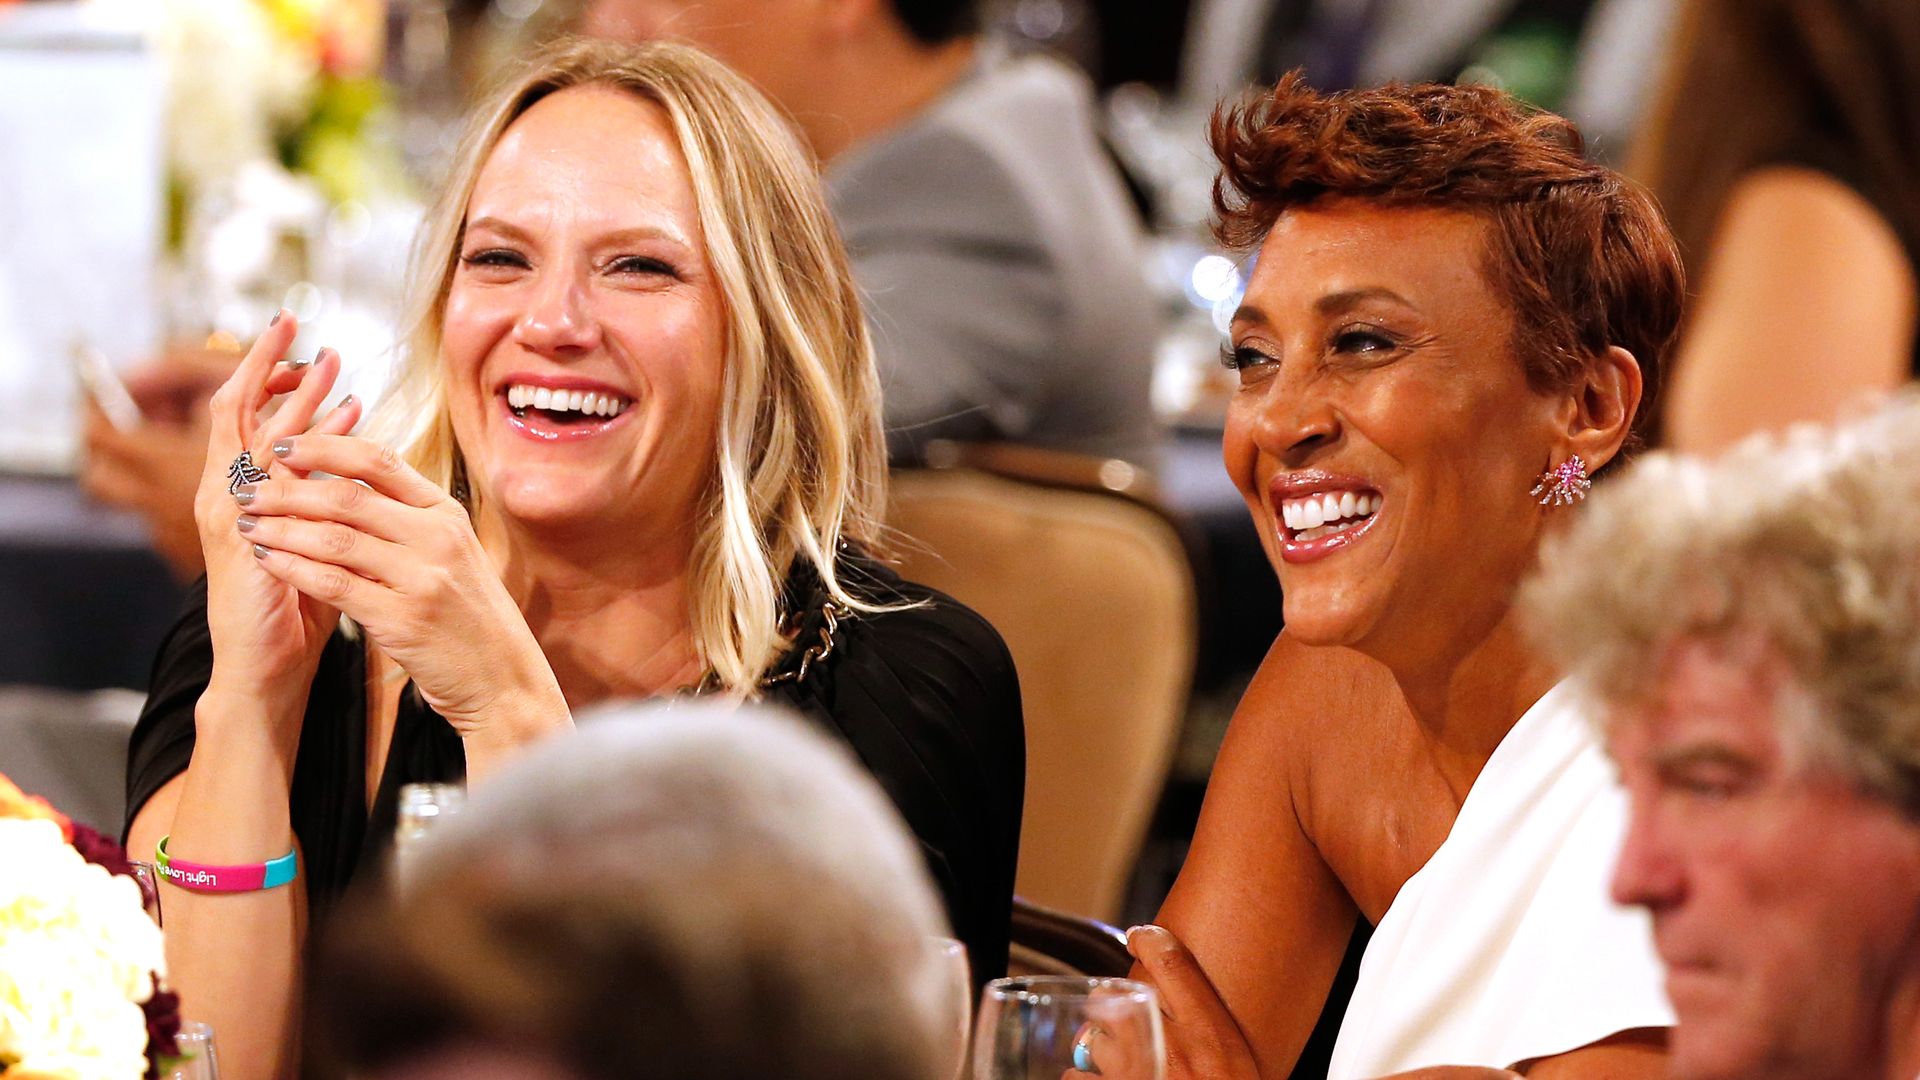 Robin Roberts and Amber Laign smiling sat at a table during an event